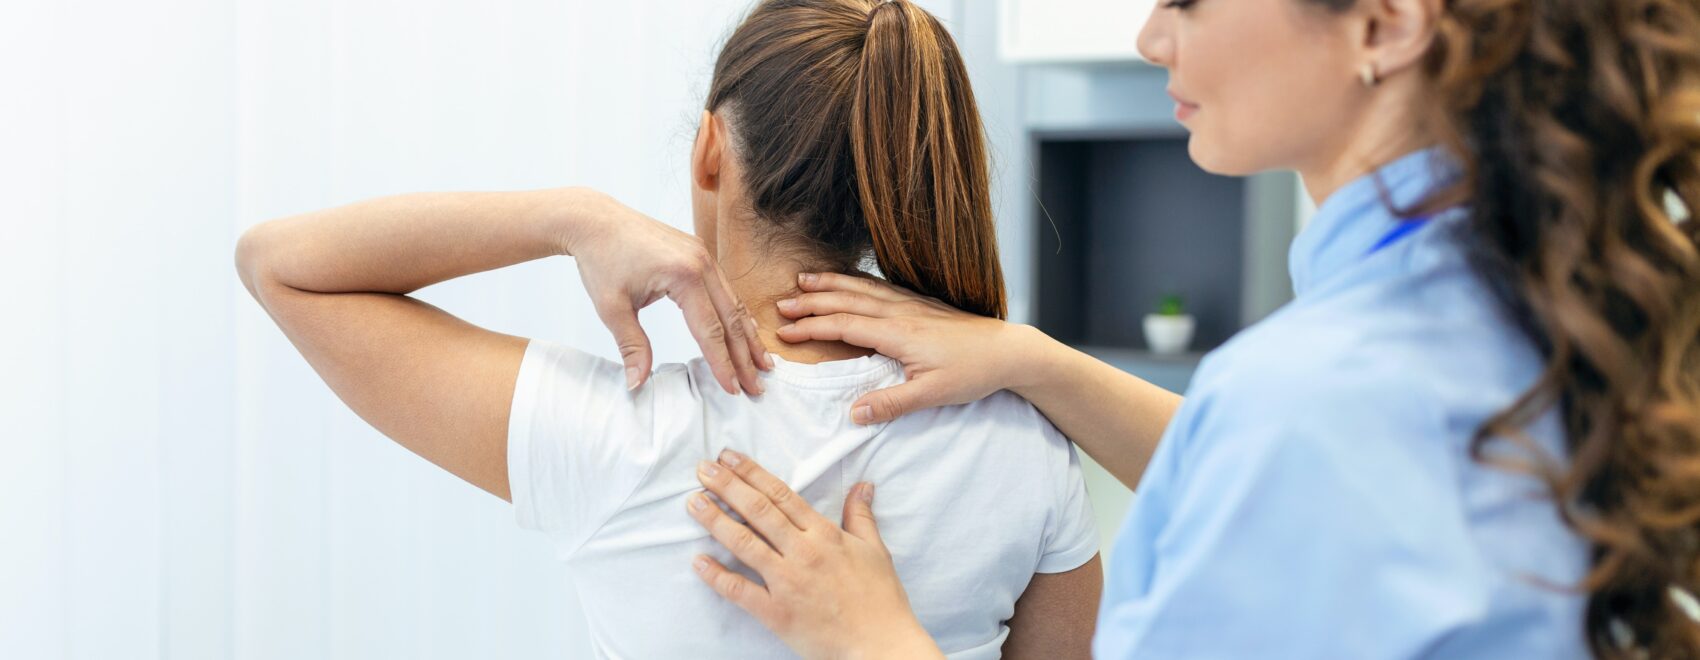 Image of a Chiropractor in Orland Park assessing a patients back. Showing what you can expect when you can expect from seeing a holistic chiropractor for chiropractic care in Orland Park or the Chicago area.